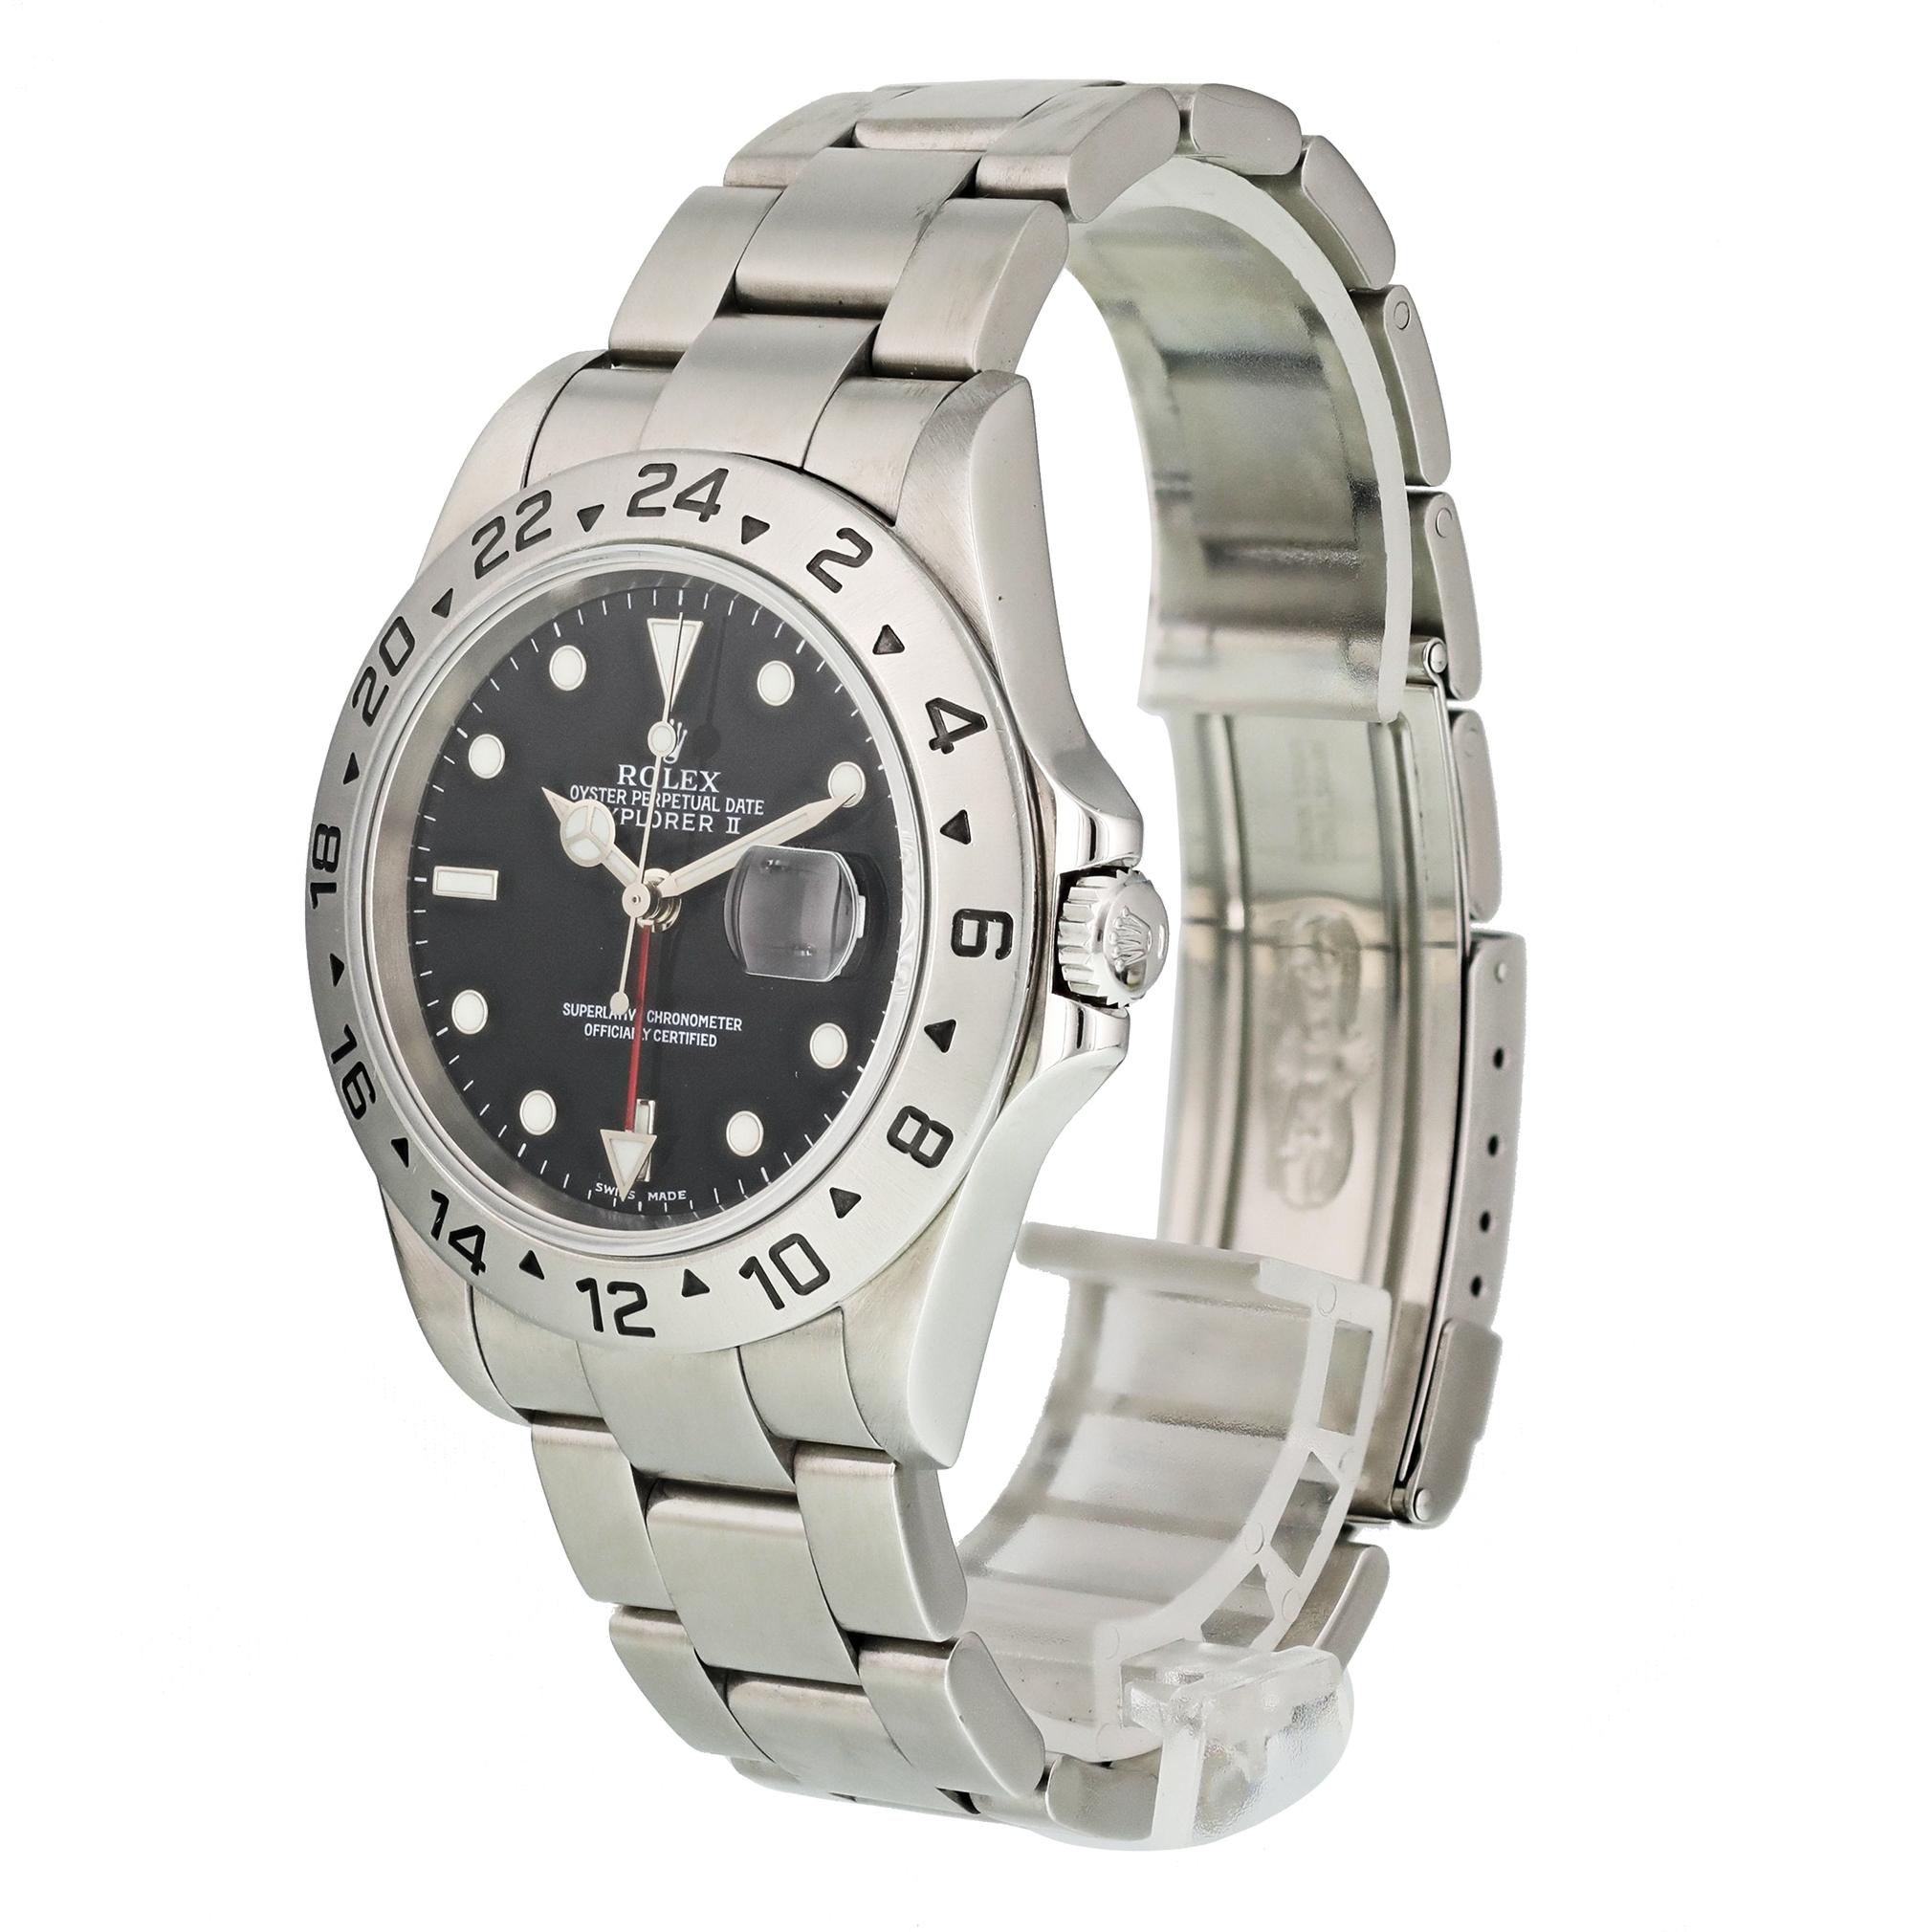 Rolex Explorer II 16570 Men Watch. 
40mm Stainless Steel case. 
Stainless Steel Stationary bezel. 
Black dial with Luminous Steel hands and index, dot hour markers. 
Minute markers on the outer dial. 
Date display at the 3 o'clock position.